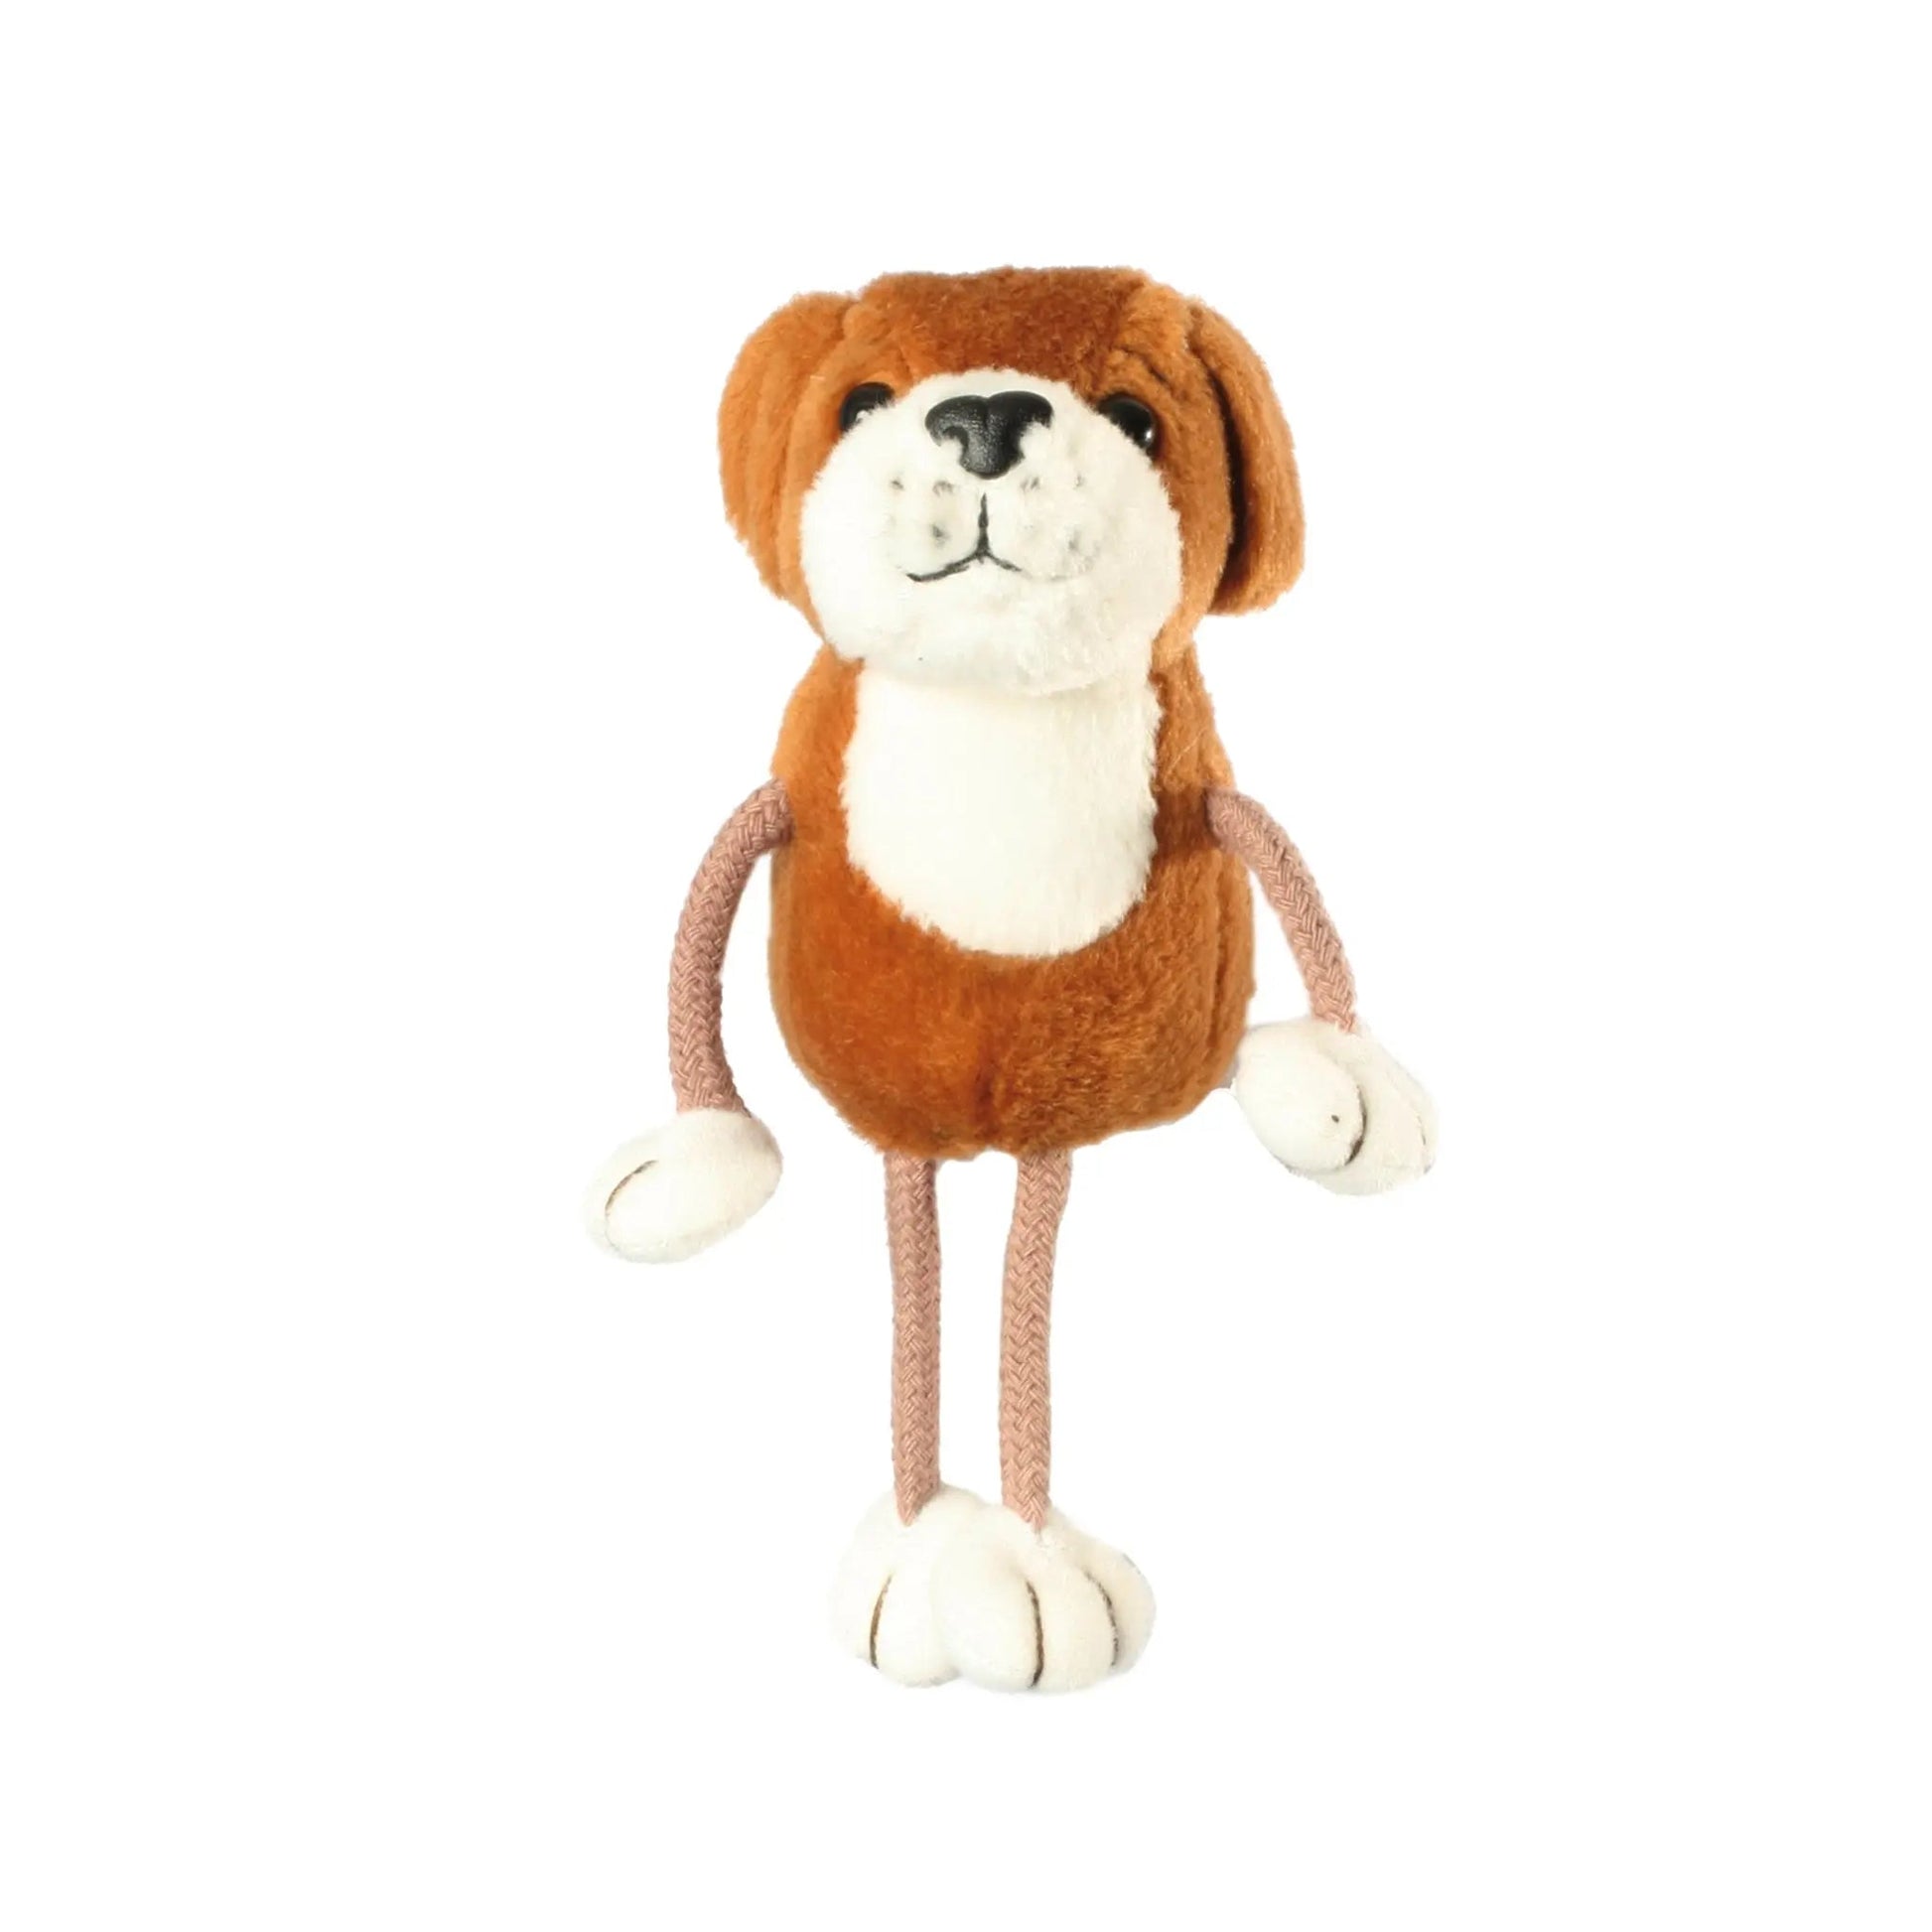 Dog Finger Puppet - The Puppet Company - The Forgotten Toy Shop